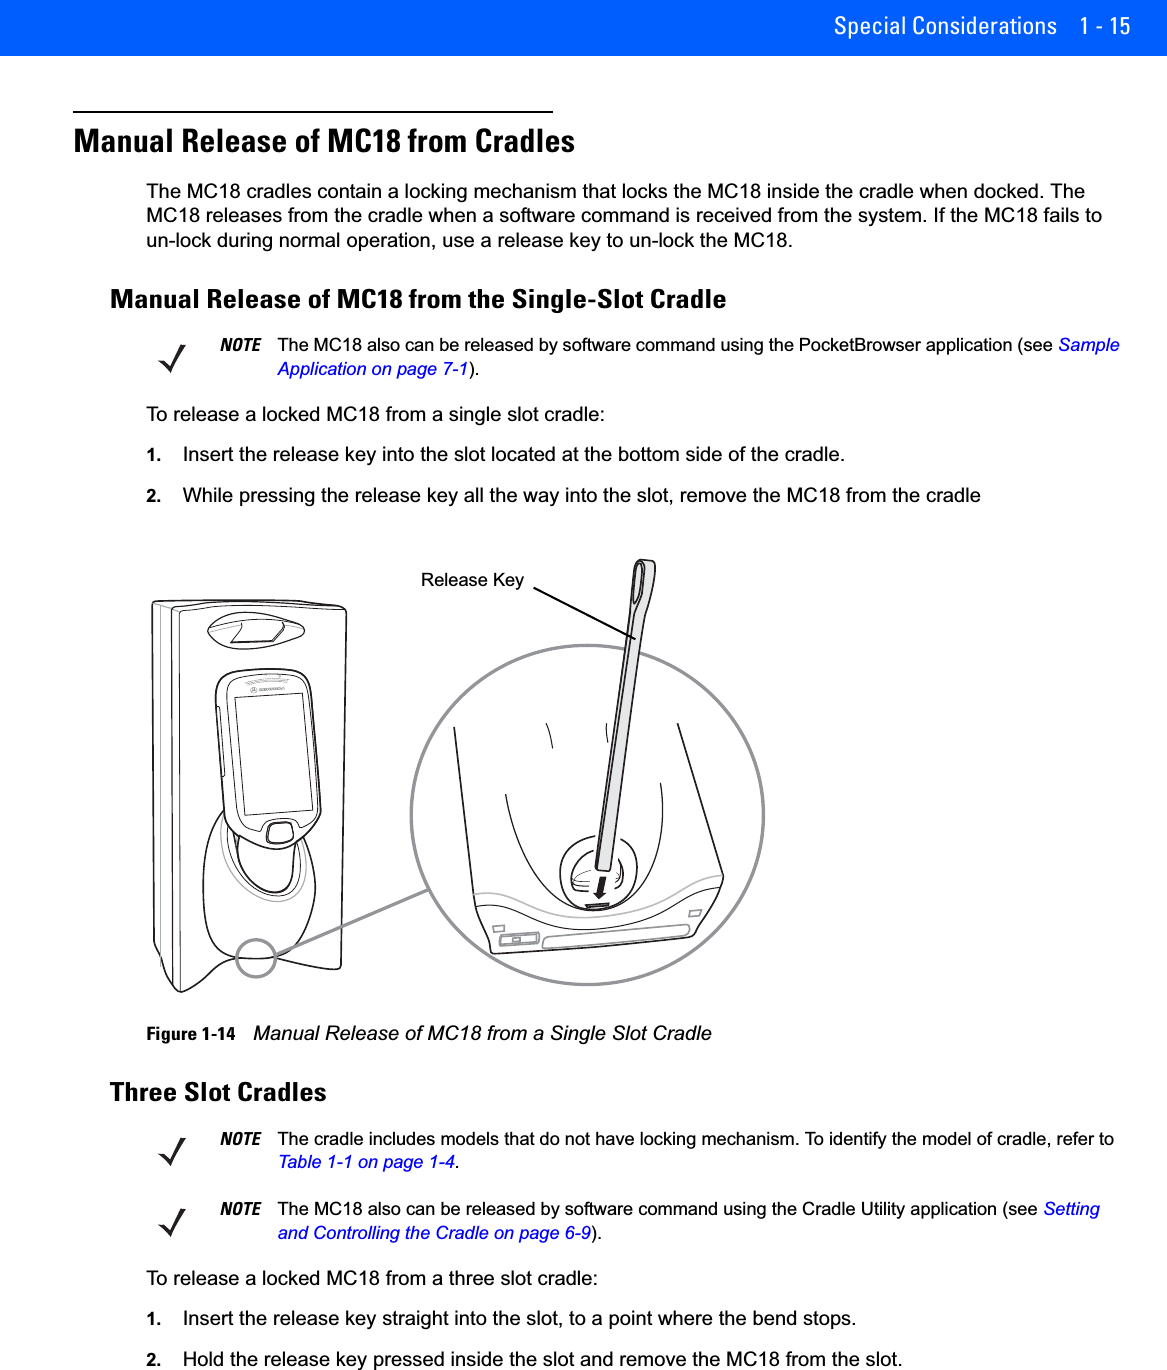 Special Considerations 1 - 15Manual Release of MC18 from CradlesThe MC18 cradles contain a locking mechanism that locks the MC18 inside the cradle when docked. The MC18 releases from the cradle when a software command is received from the system. If the MC18 fails to un-lock during normal operation, use a release key to un-lock the MC18.Manual Release of MC18 from the Single-Slot CradleTo release a locked MC18 from a single slot cradle:1. Insert the release key into the slot located at the bottom side of the cradle.2. While pressing the release key all the way into the slot, remove the MC18 from the cradleFigure 1-14    Manual Release of MC18 from a Single Slot CradleThree Slot CradlesTo release a locked MC18 from a three slot cradle:1. Insert the release key straight into the slot, to a point where the bend stops.2. Hold the release key pressed inside the slot and remove the MC18 from the slot.NOTE The MC18 also can be released by software command using the PocketBrowser application (see Sample Application on page 7-1).ABRelease KeyNOTE The cradle includes models that do not have locking mechanism. To identify the model of cradle, refer to Table 1-1 on page 1-4.NOTE The MC18 also can be released by software command using the Cradle Utility application (see Setting and Controlling the Cradle on page 6-9).